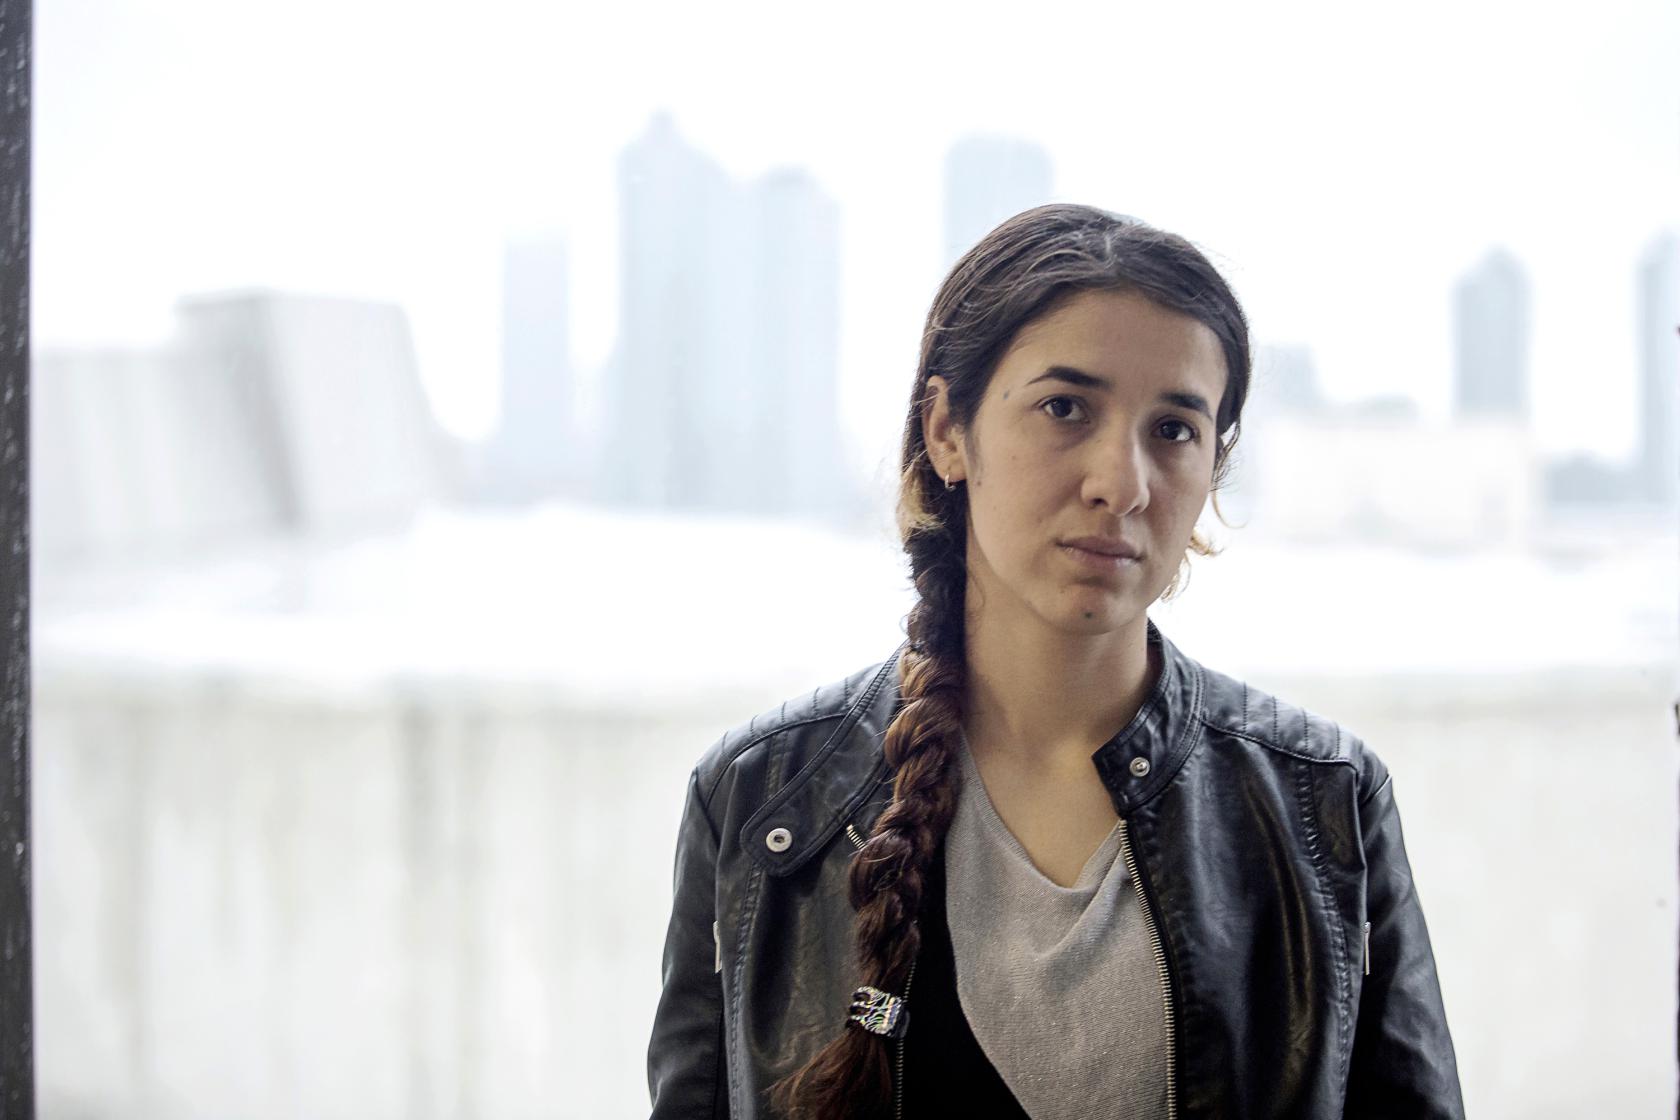 17 December 2015 - Nadia, a young Iraqi Yazidi who was abducted into slavery by members of ISIS, traveled to the US to give interviews and testify at the UN. She is living in Germany. What remains of her family are living in refugee camps.